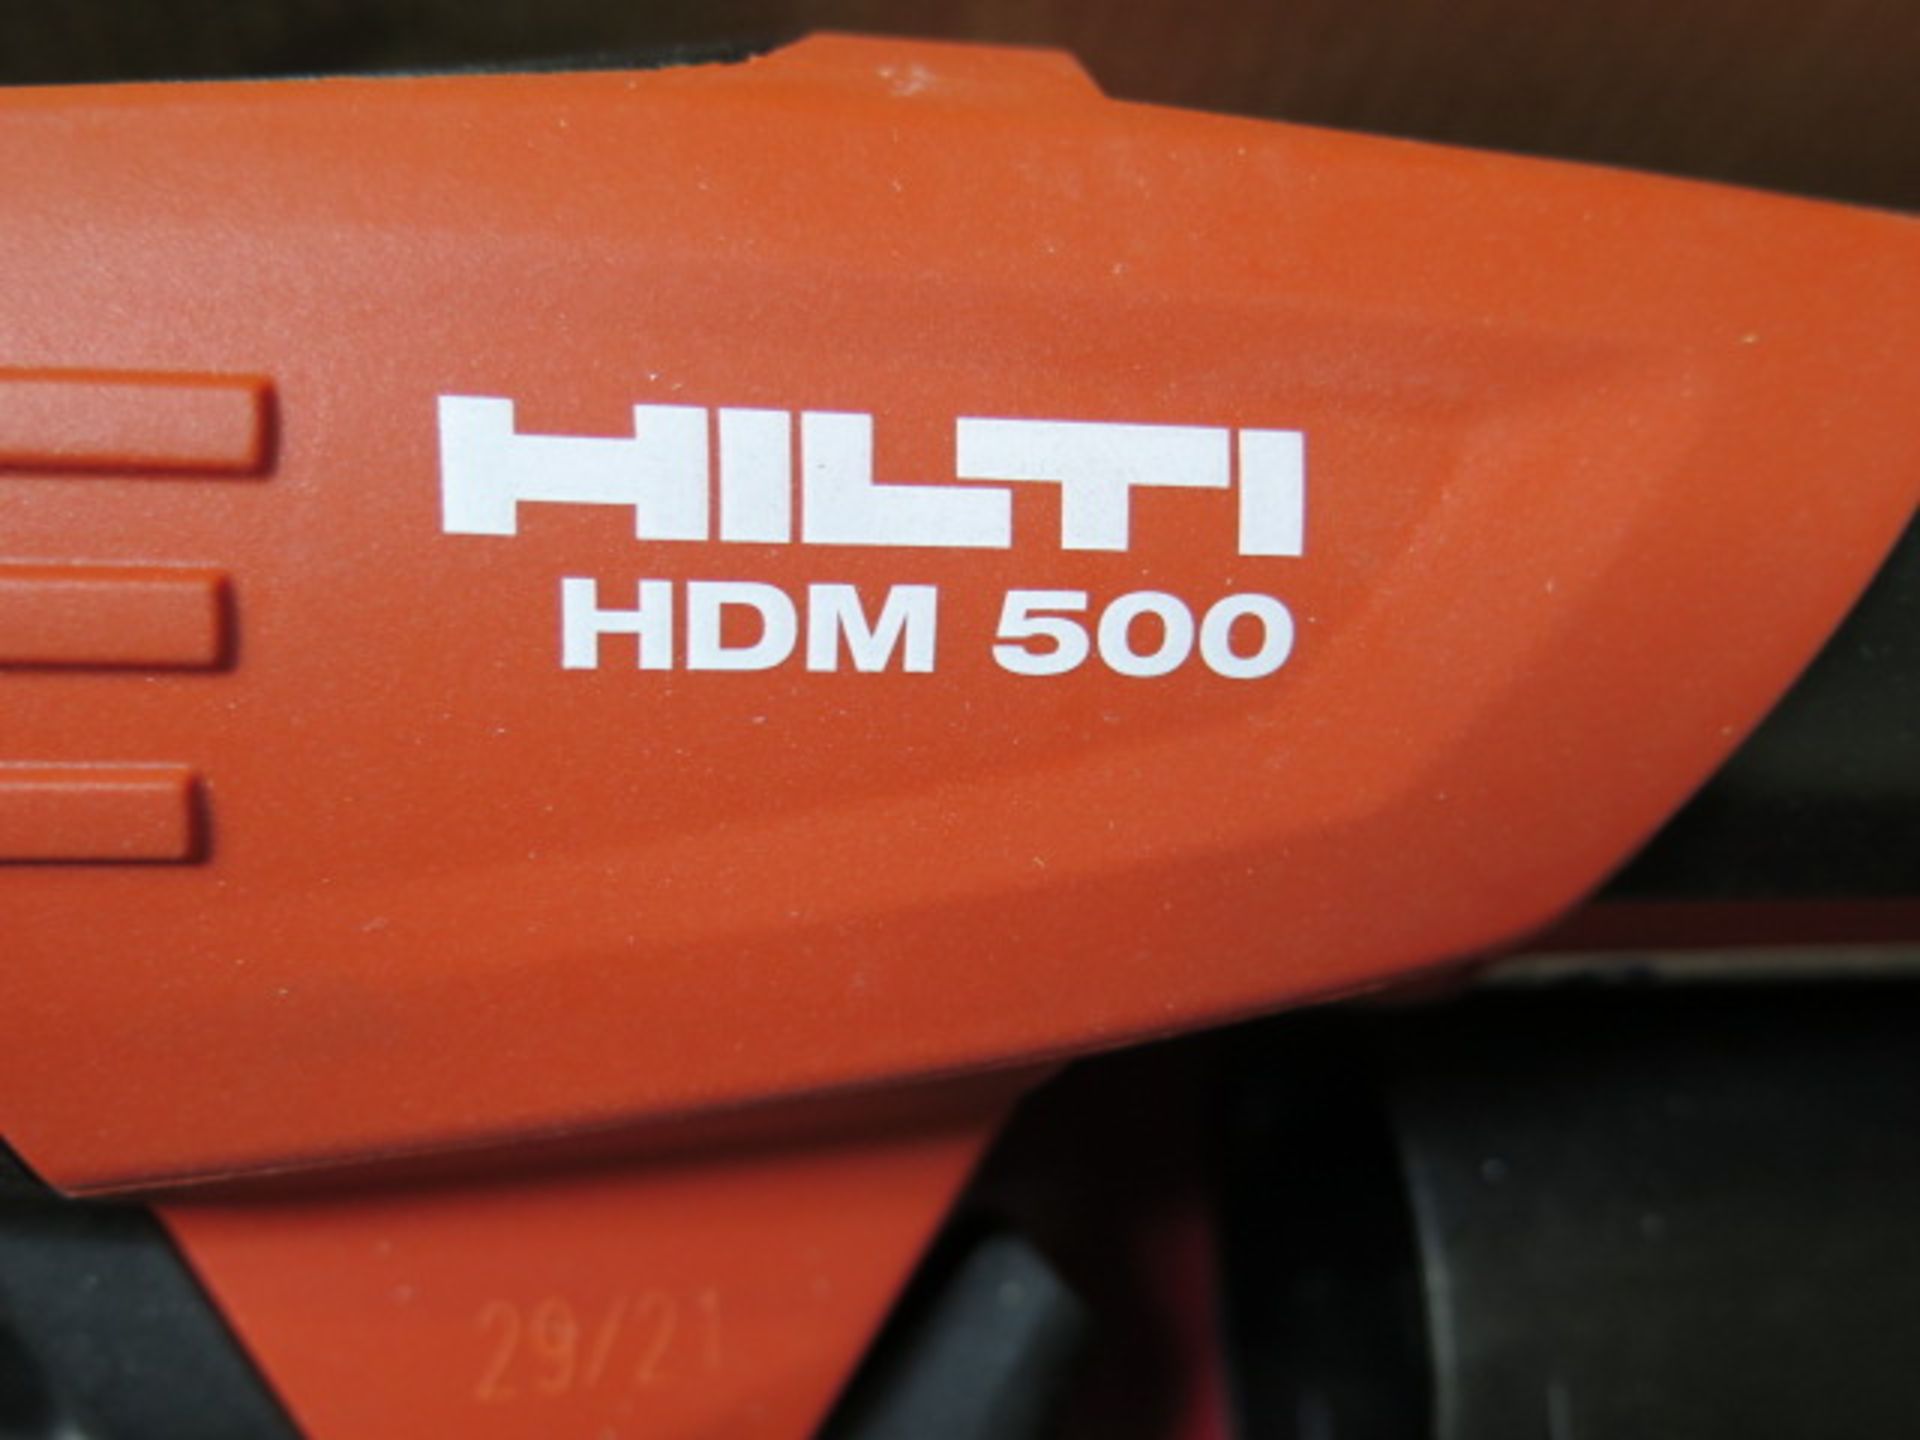 Hilti HDM 500 Manual 2-Part Dispensers (2) (One is NEW - One is used) (SOLD AS-IS - NO WARRANTY) - Image 5 of 5